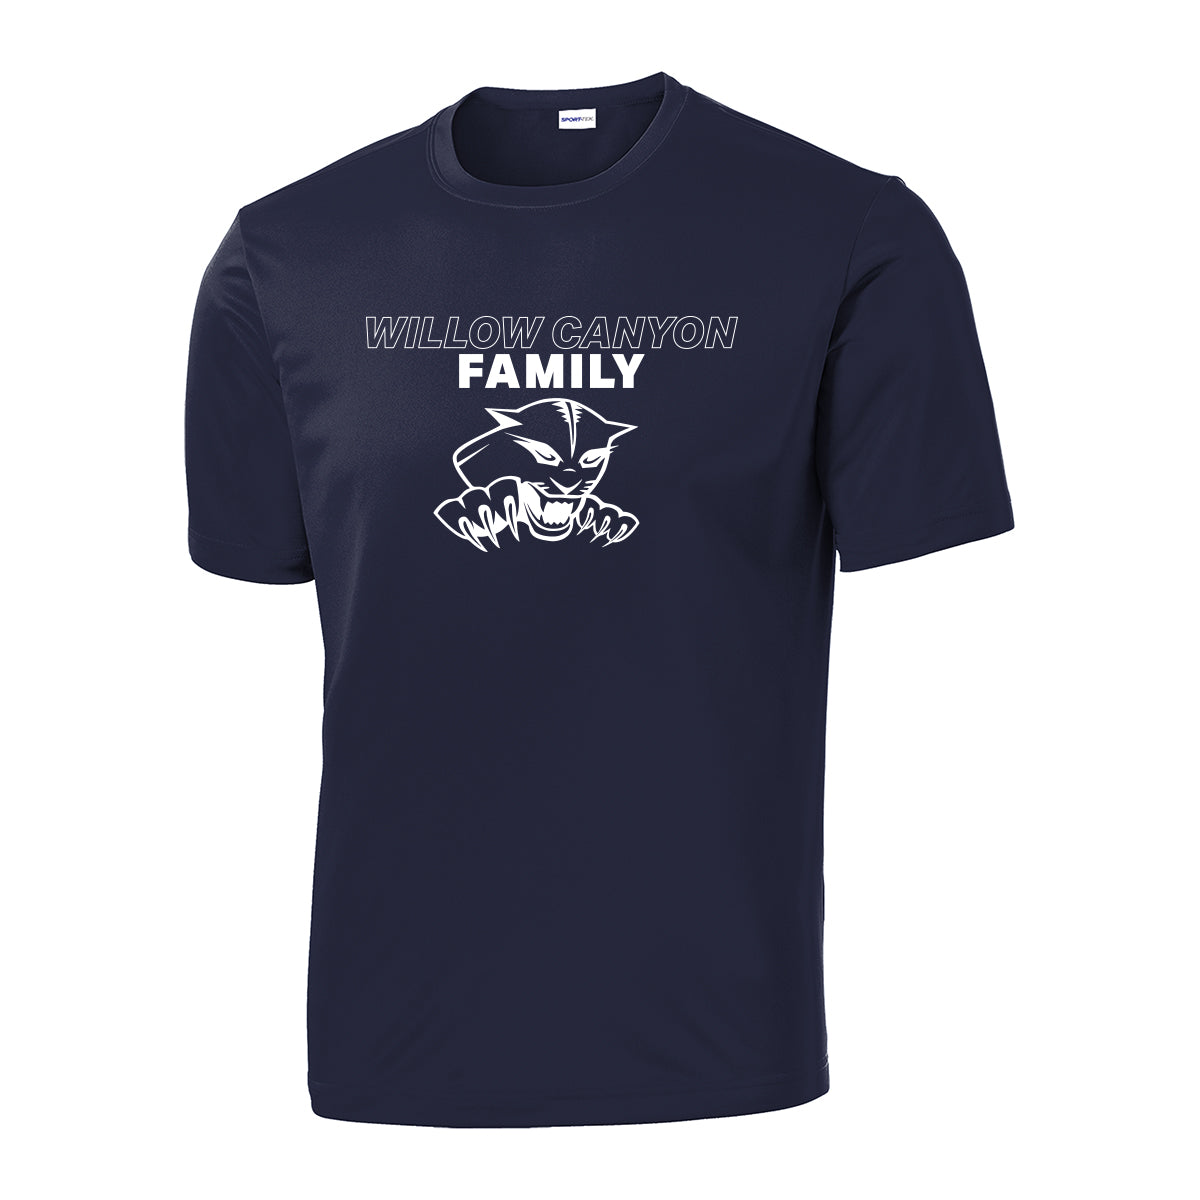 Willow Canyon Family Dri Fit Tee